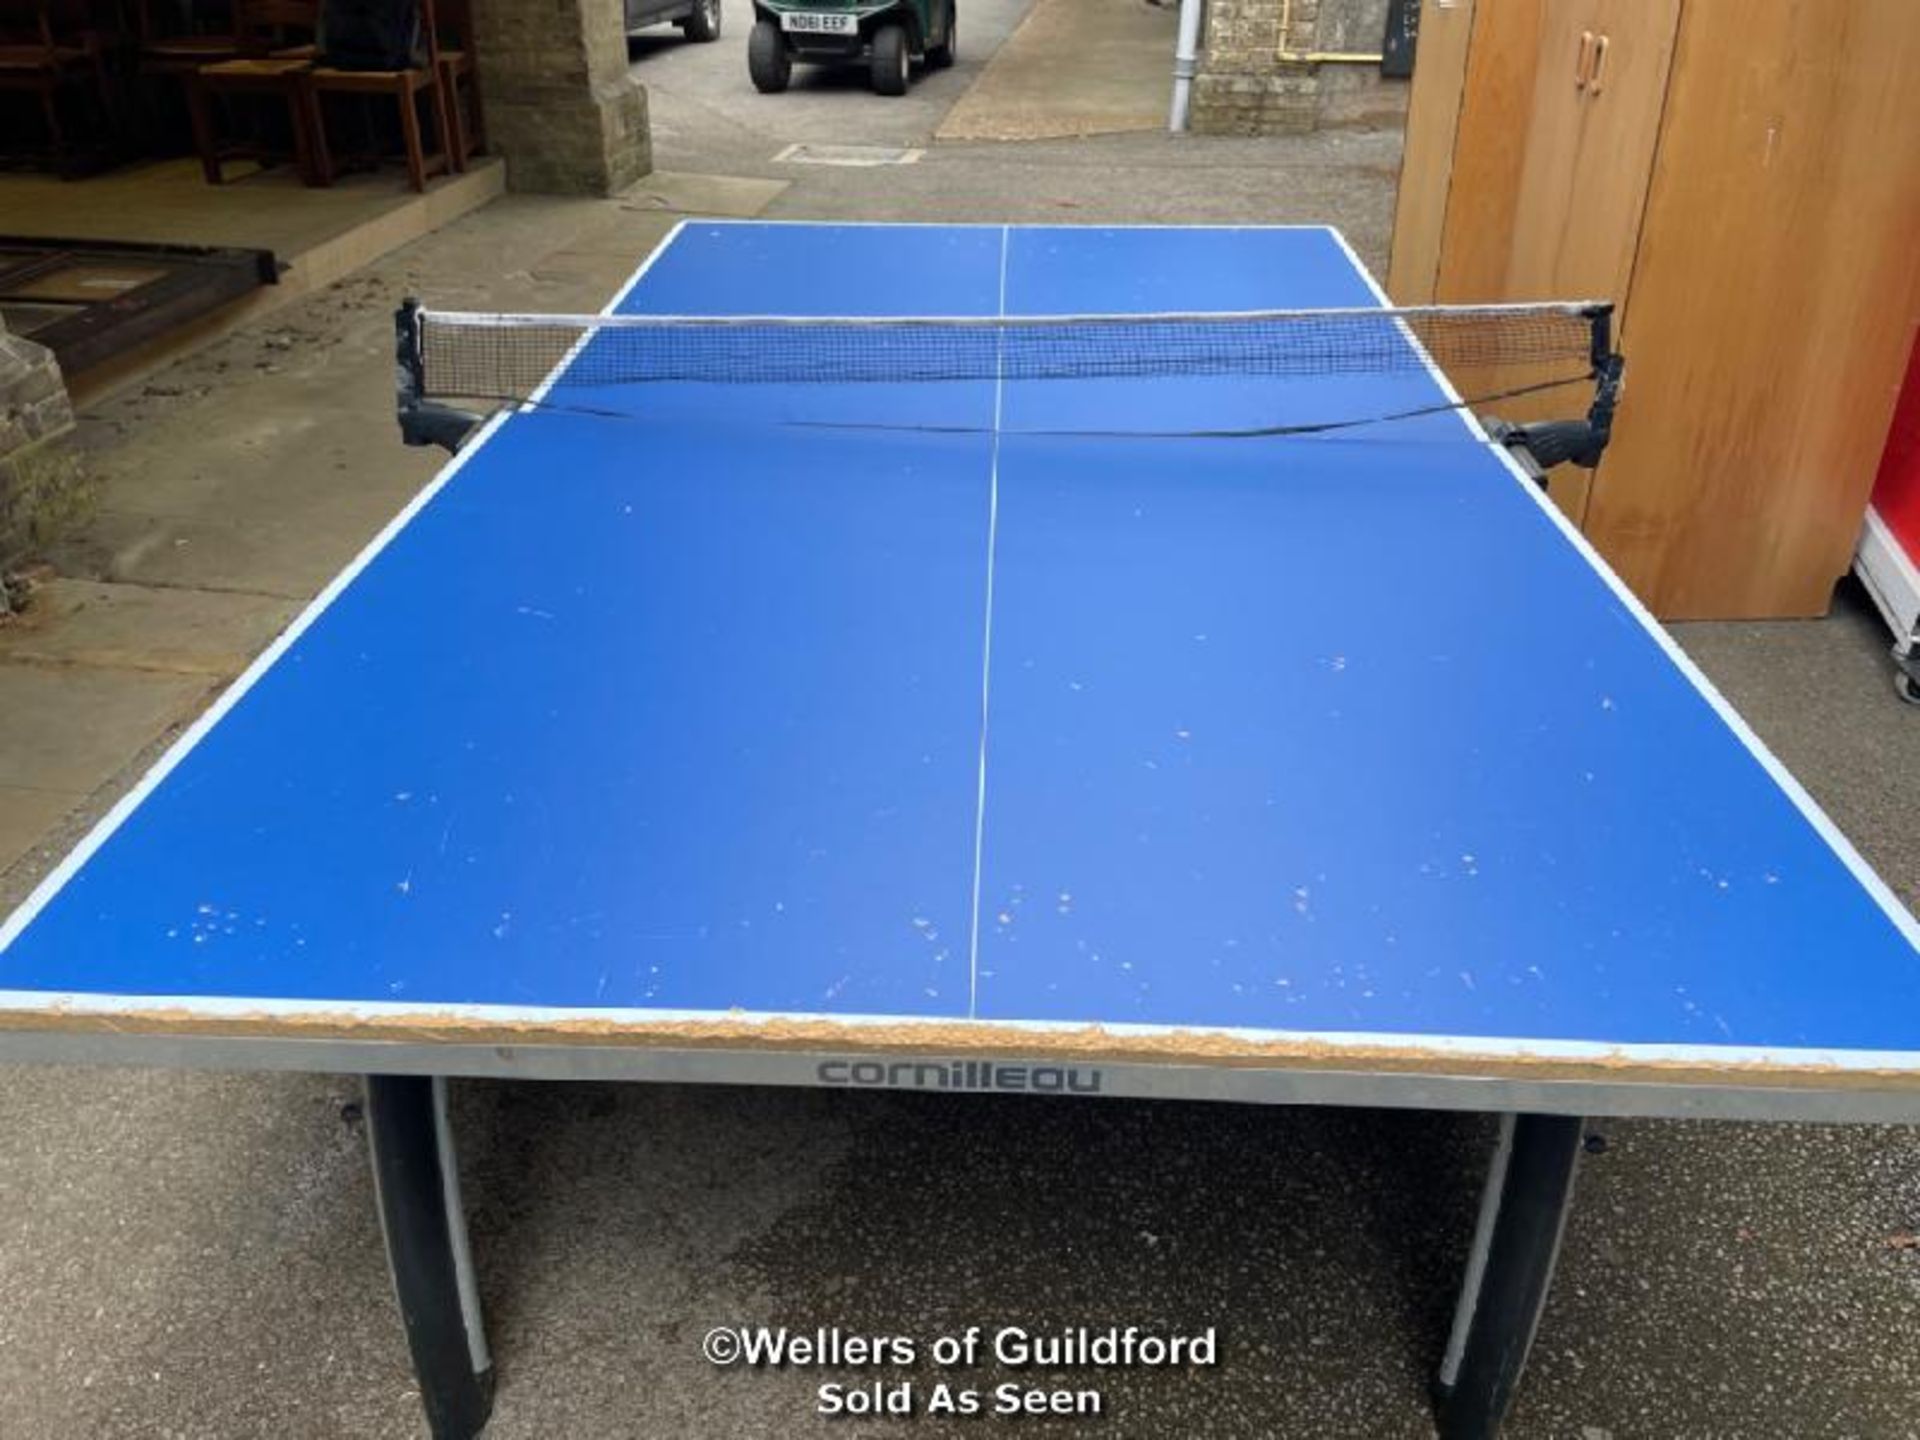 *CORNILLEAU FOLDING TABLE TENNIS TABLE WITH NET, NET NEEDS REPLACING ND NET FIXINGS NEED SORTING - - Image 3 of 6